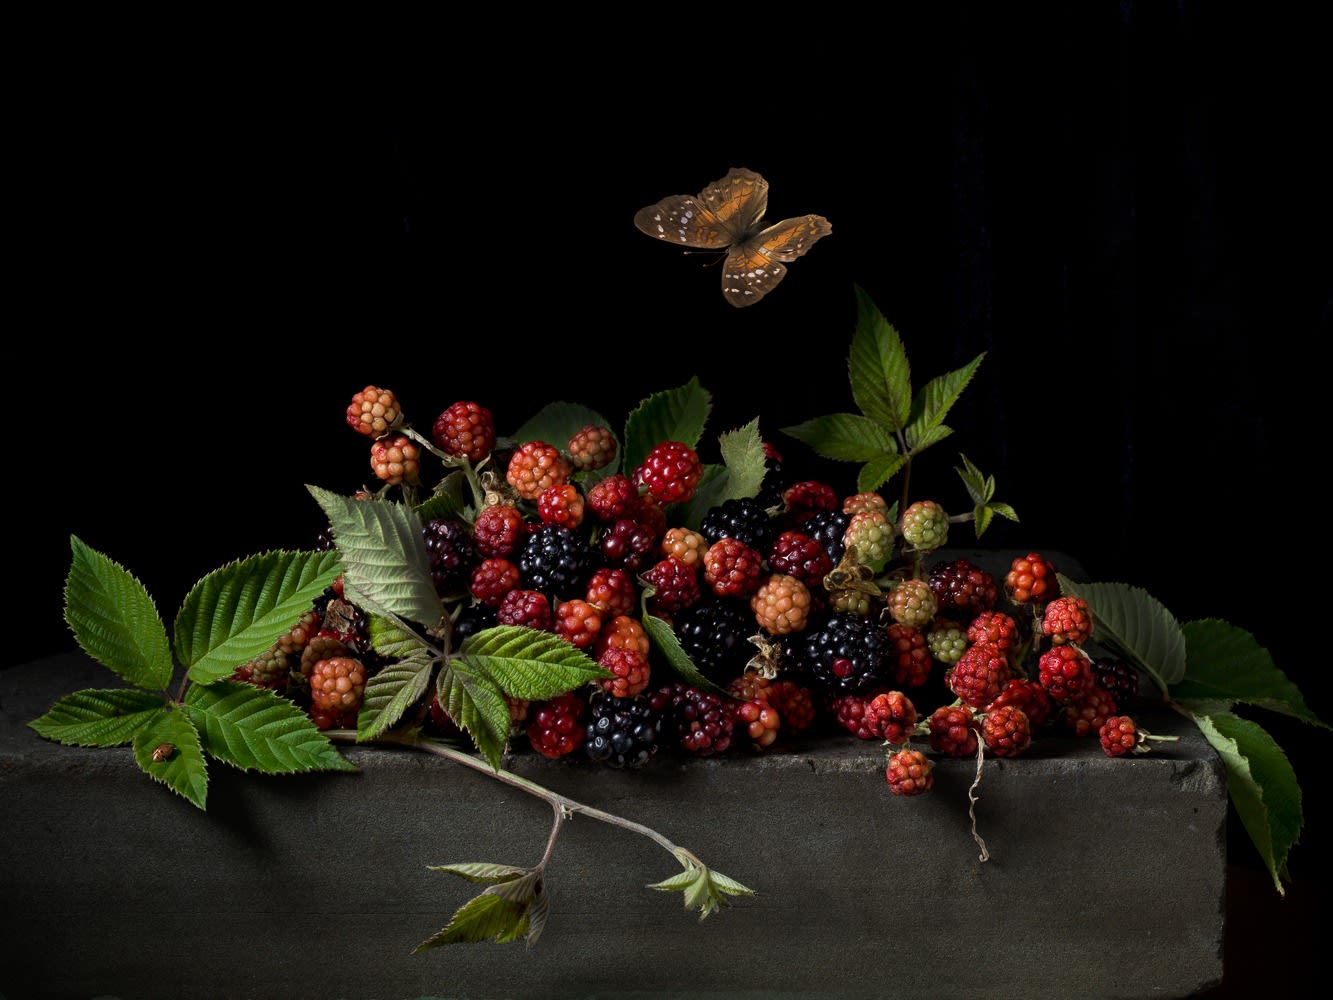 Paulette Tavormina, Blackberries and Butterfly, After A.C., 2015